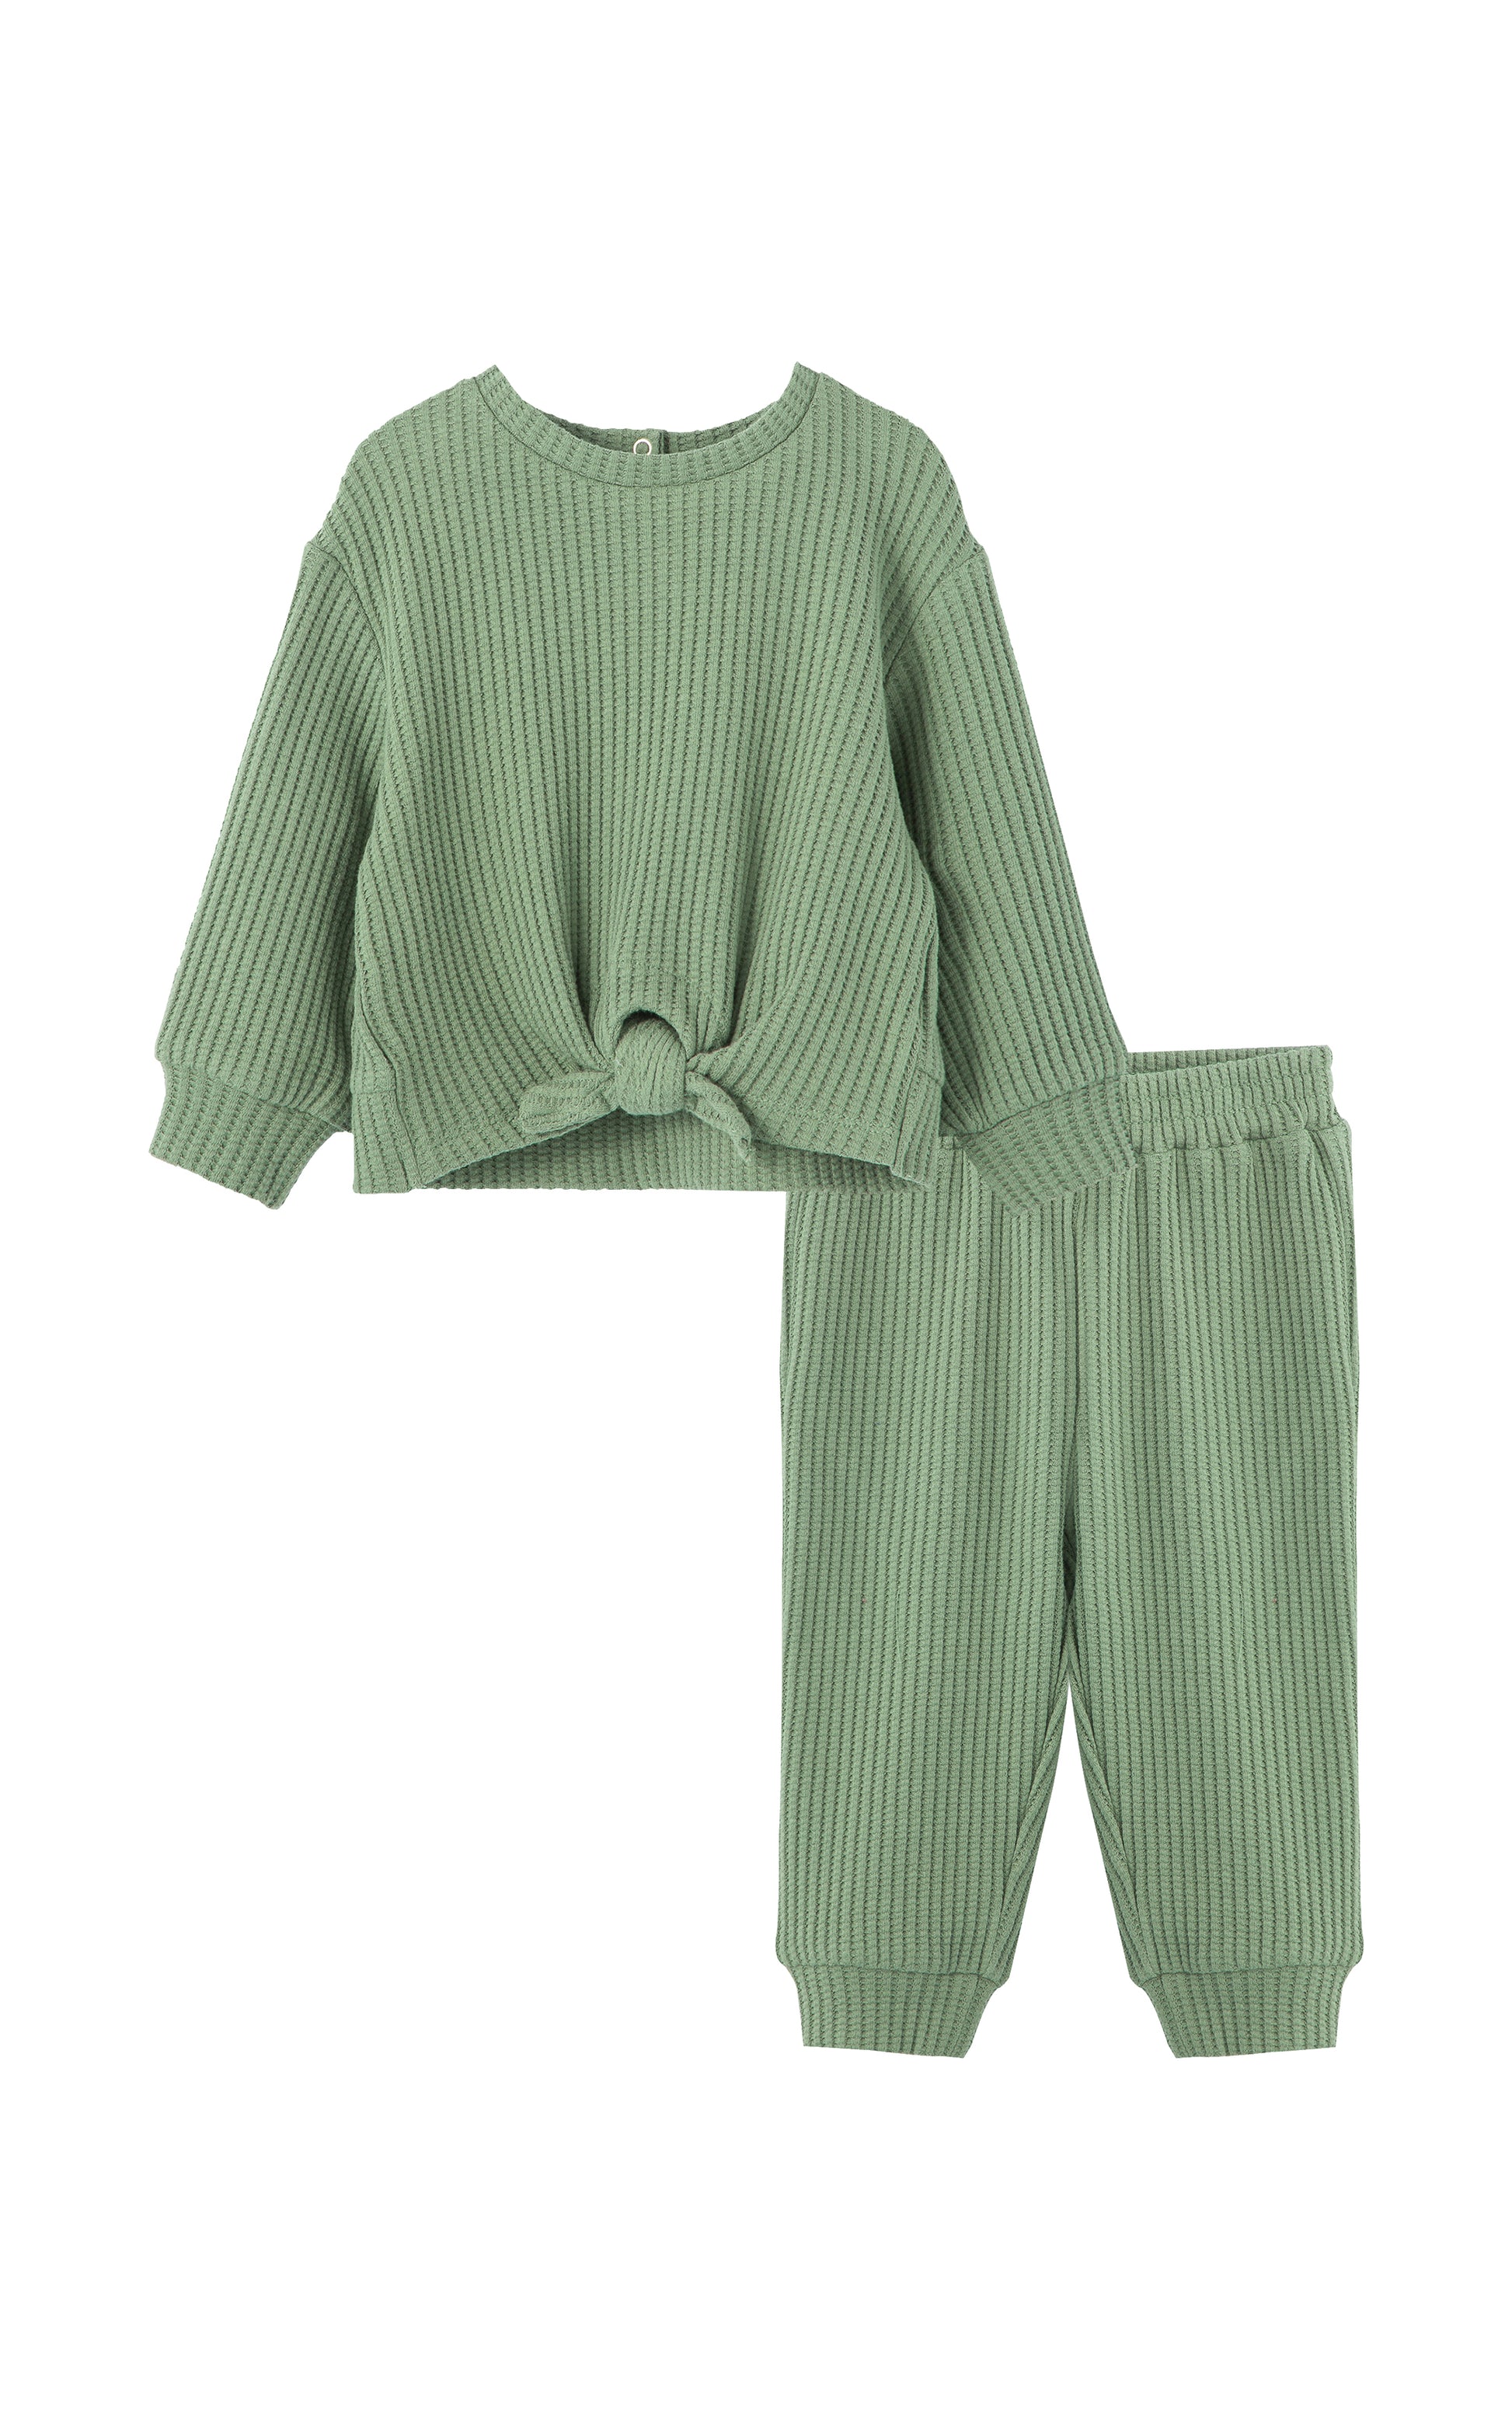 Front view of green textured knit pant set with long sleeve